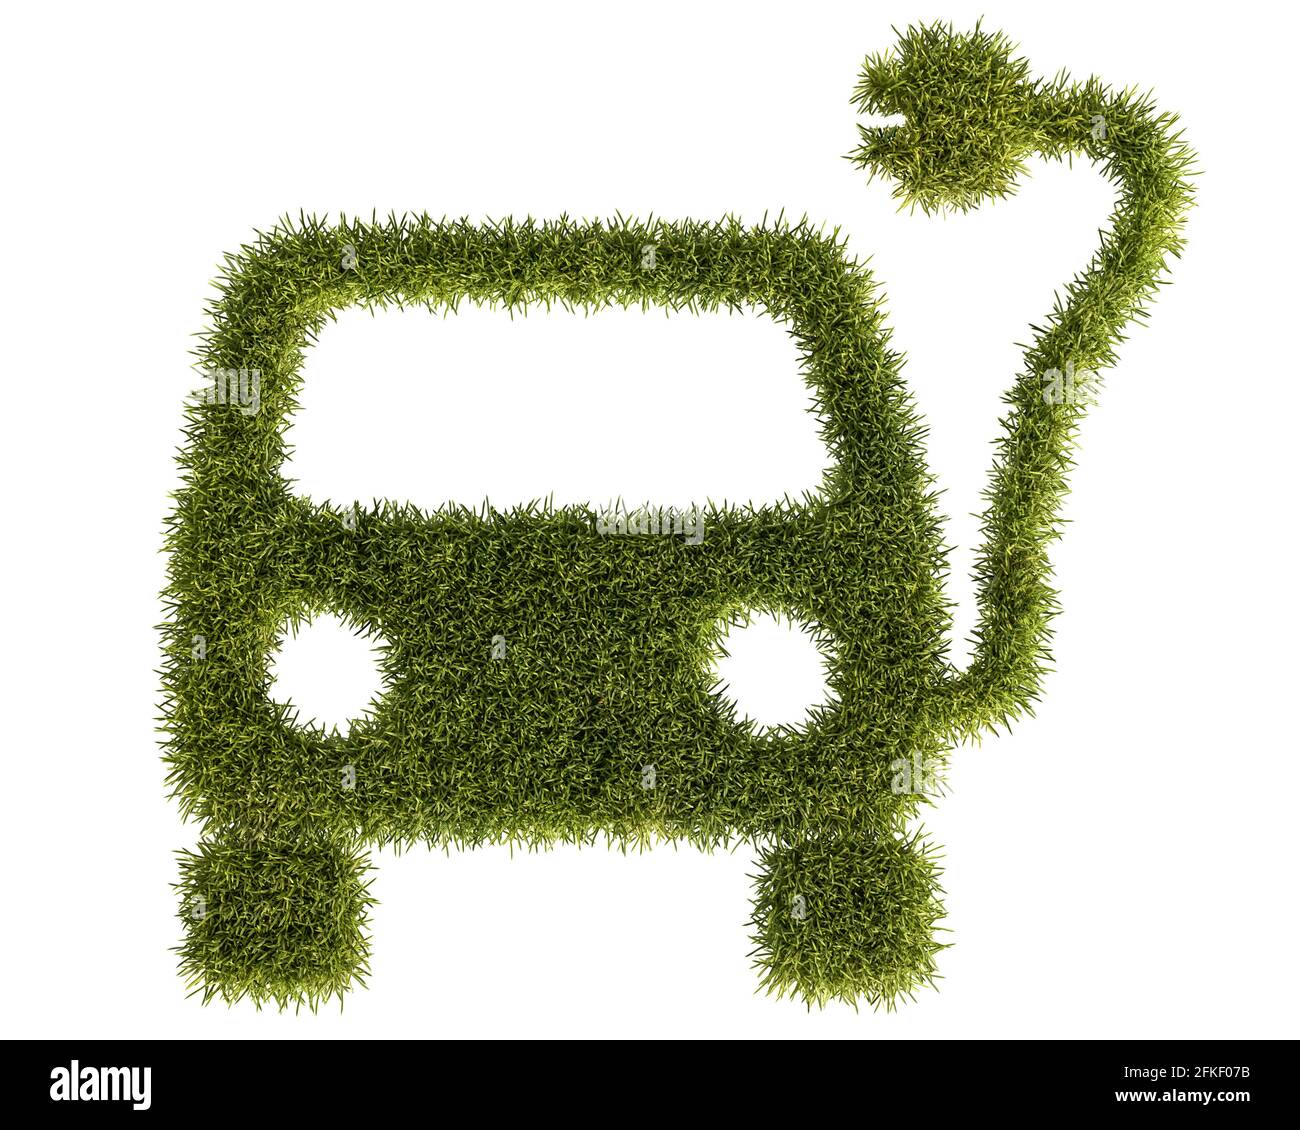 Electric car concept as a green grass patch. A car silhouette and a cable with plug. Isolated on pure white background without shadows. Stock Photo